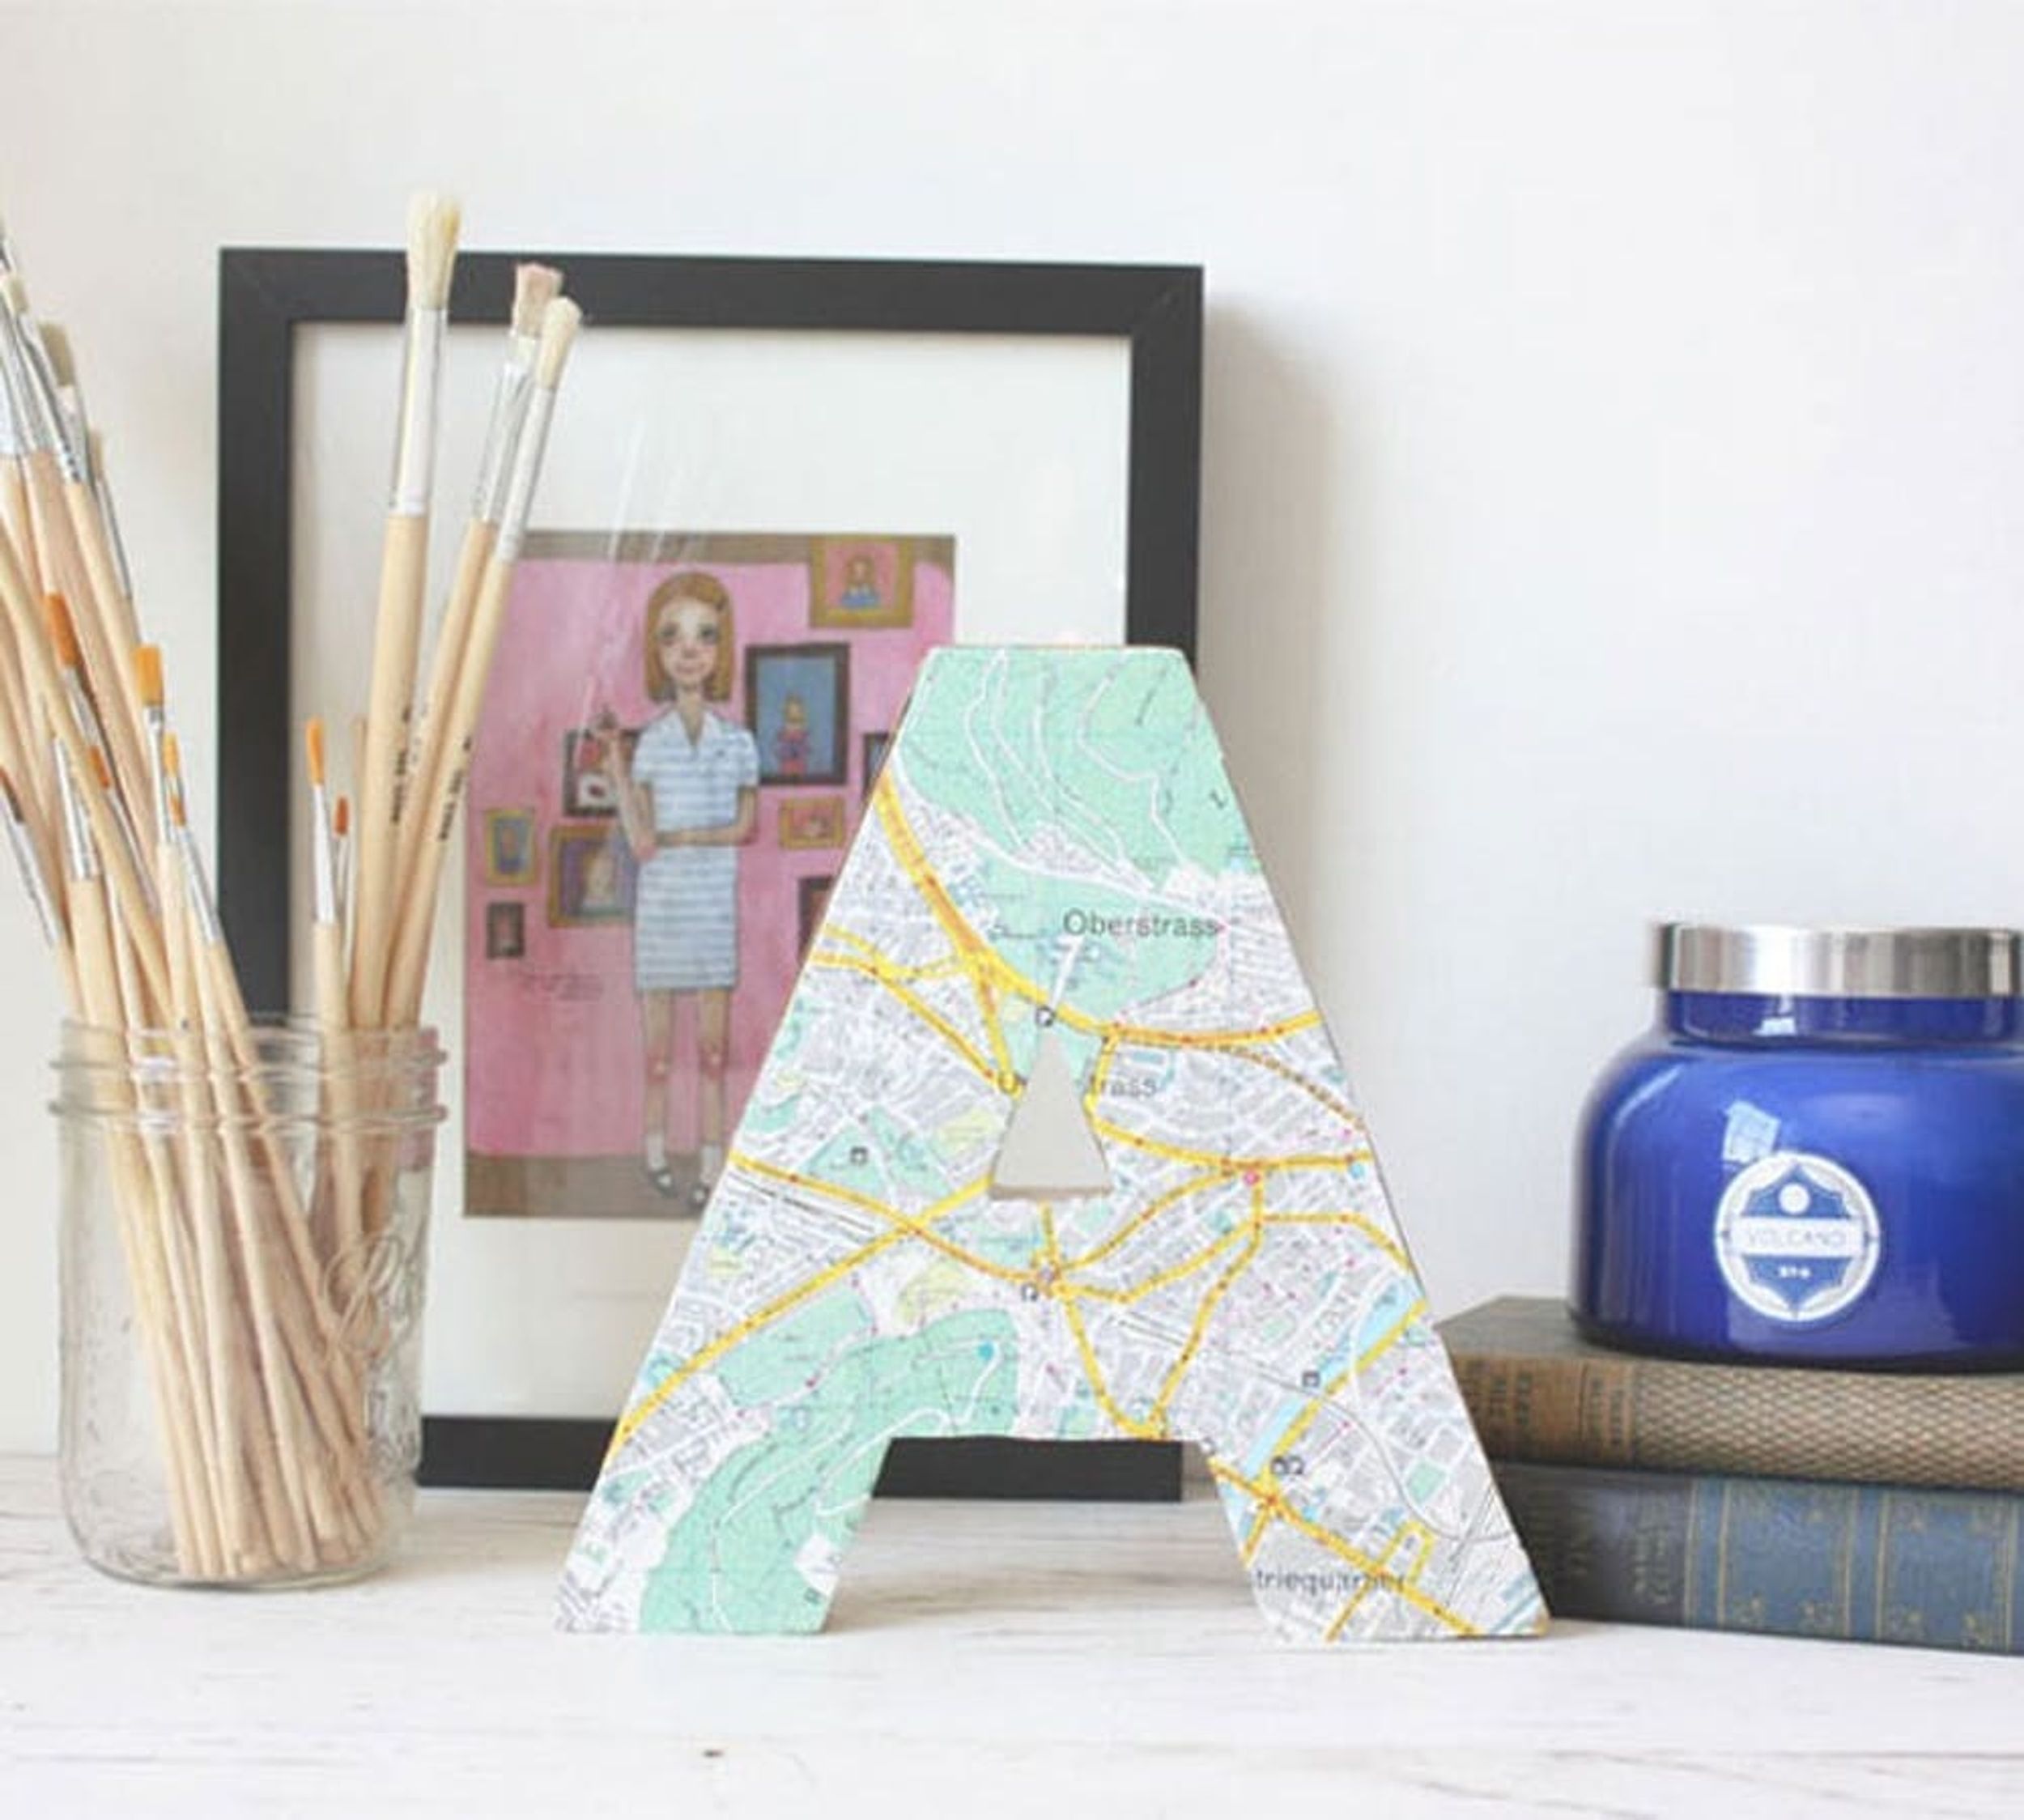 35 Clever Ways To Repurpose A Map